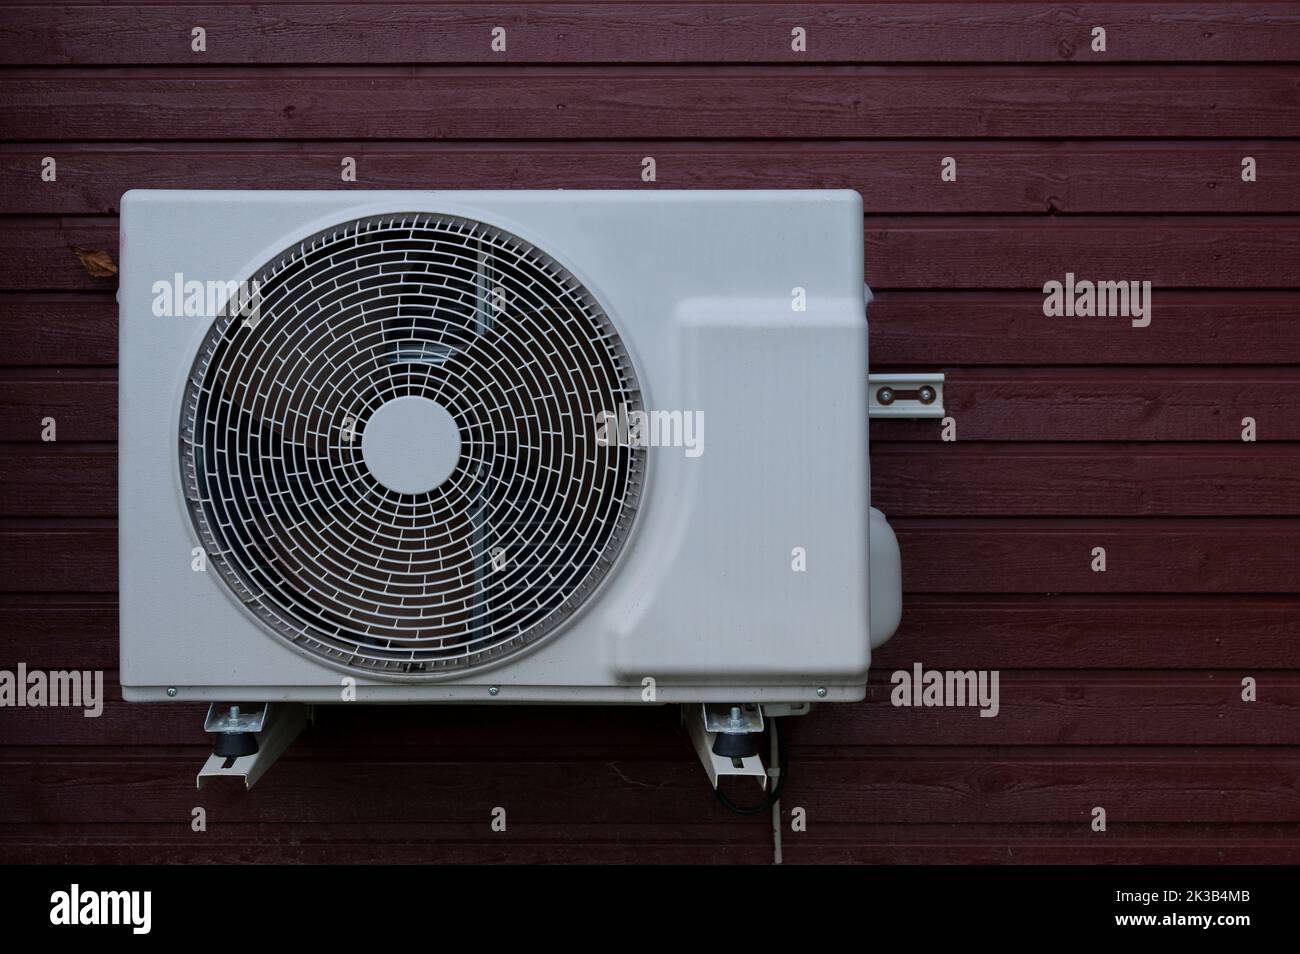 save electricity consumption with a white heat pump unit mounted on a red wood panel, Denmark, September 22, 2022 Stock Photo